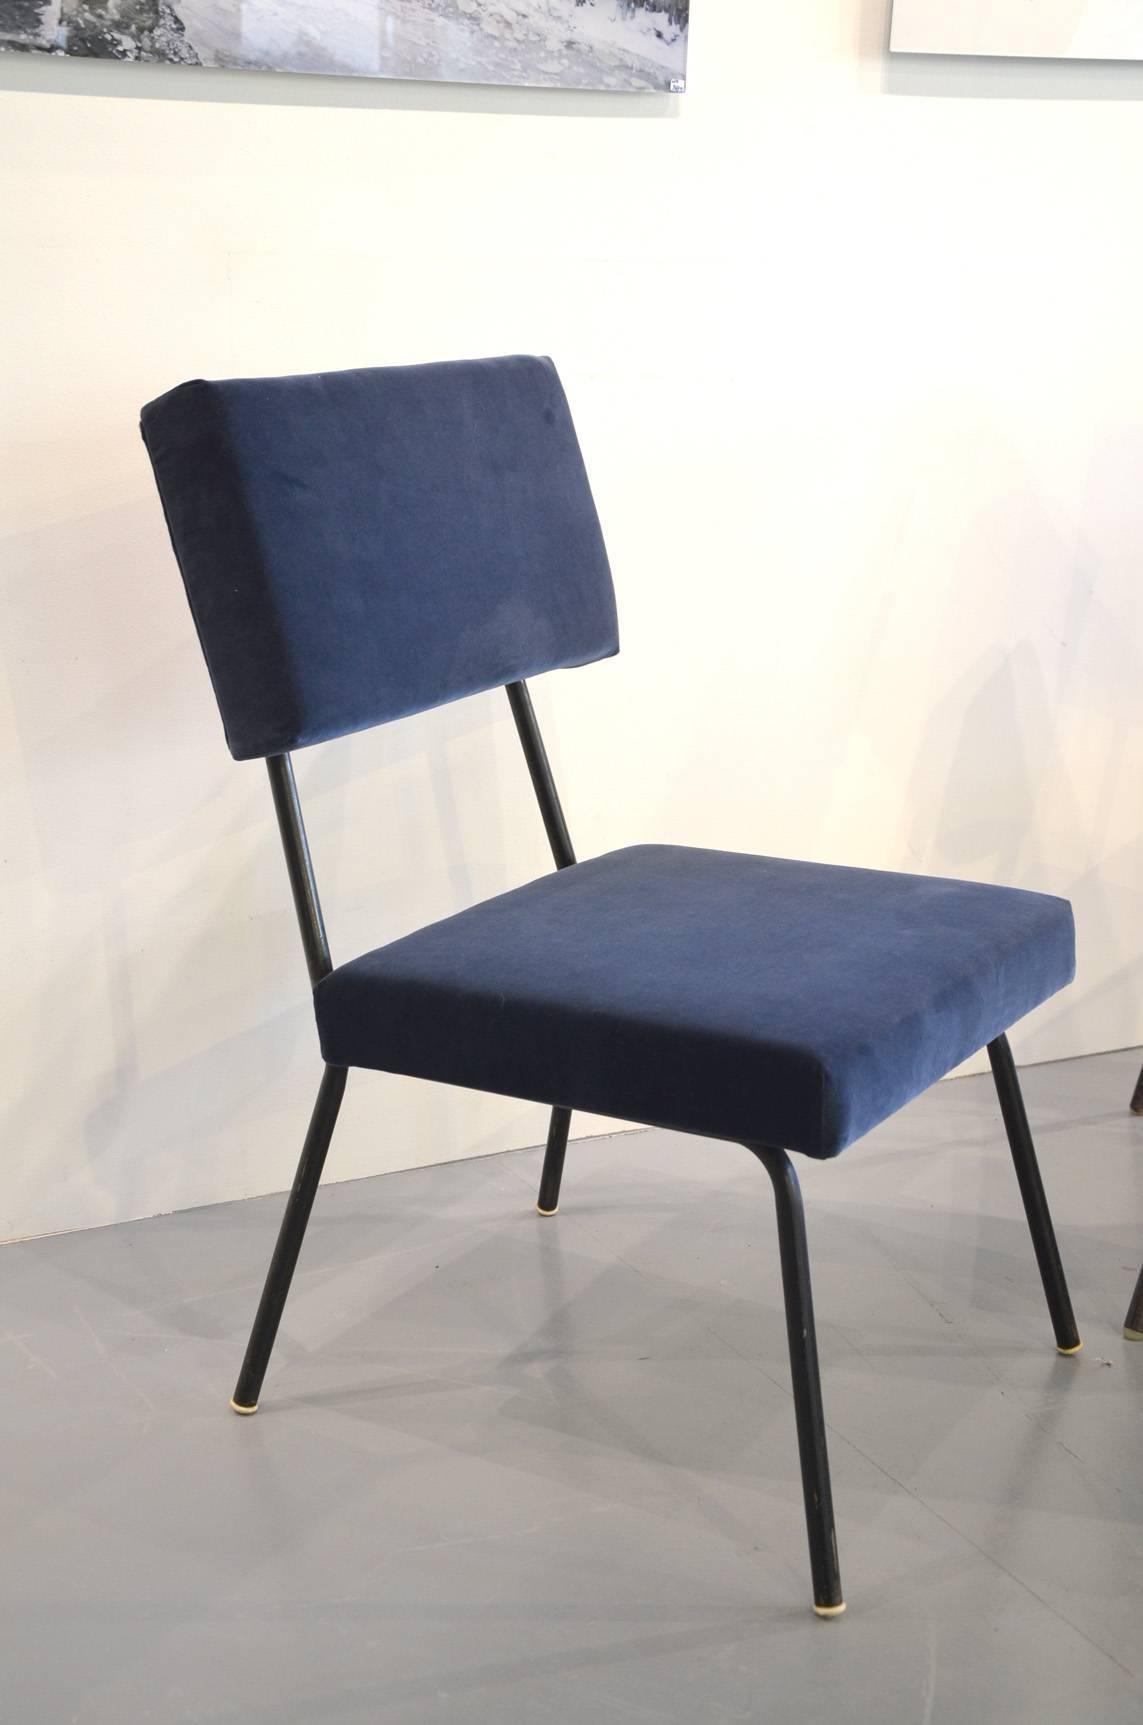 Beautiful Pair of Reupholstered low chairs, France circa 1960. Reupholsterd with a beautiful mat velvet fabric.